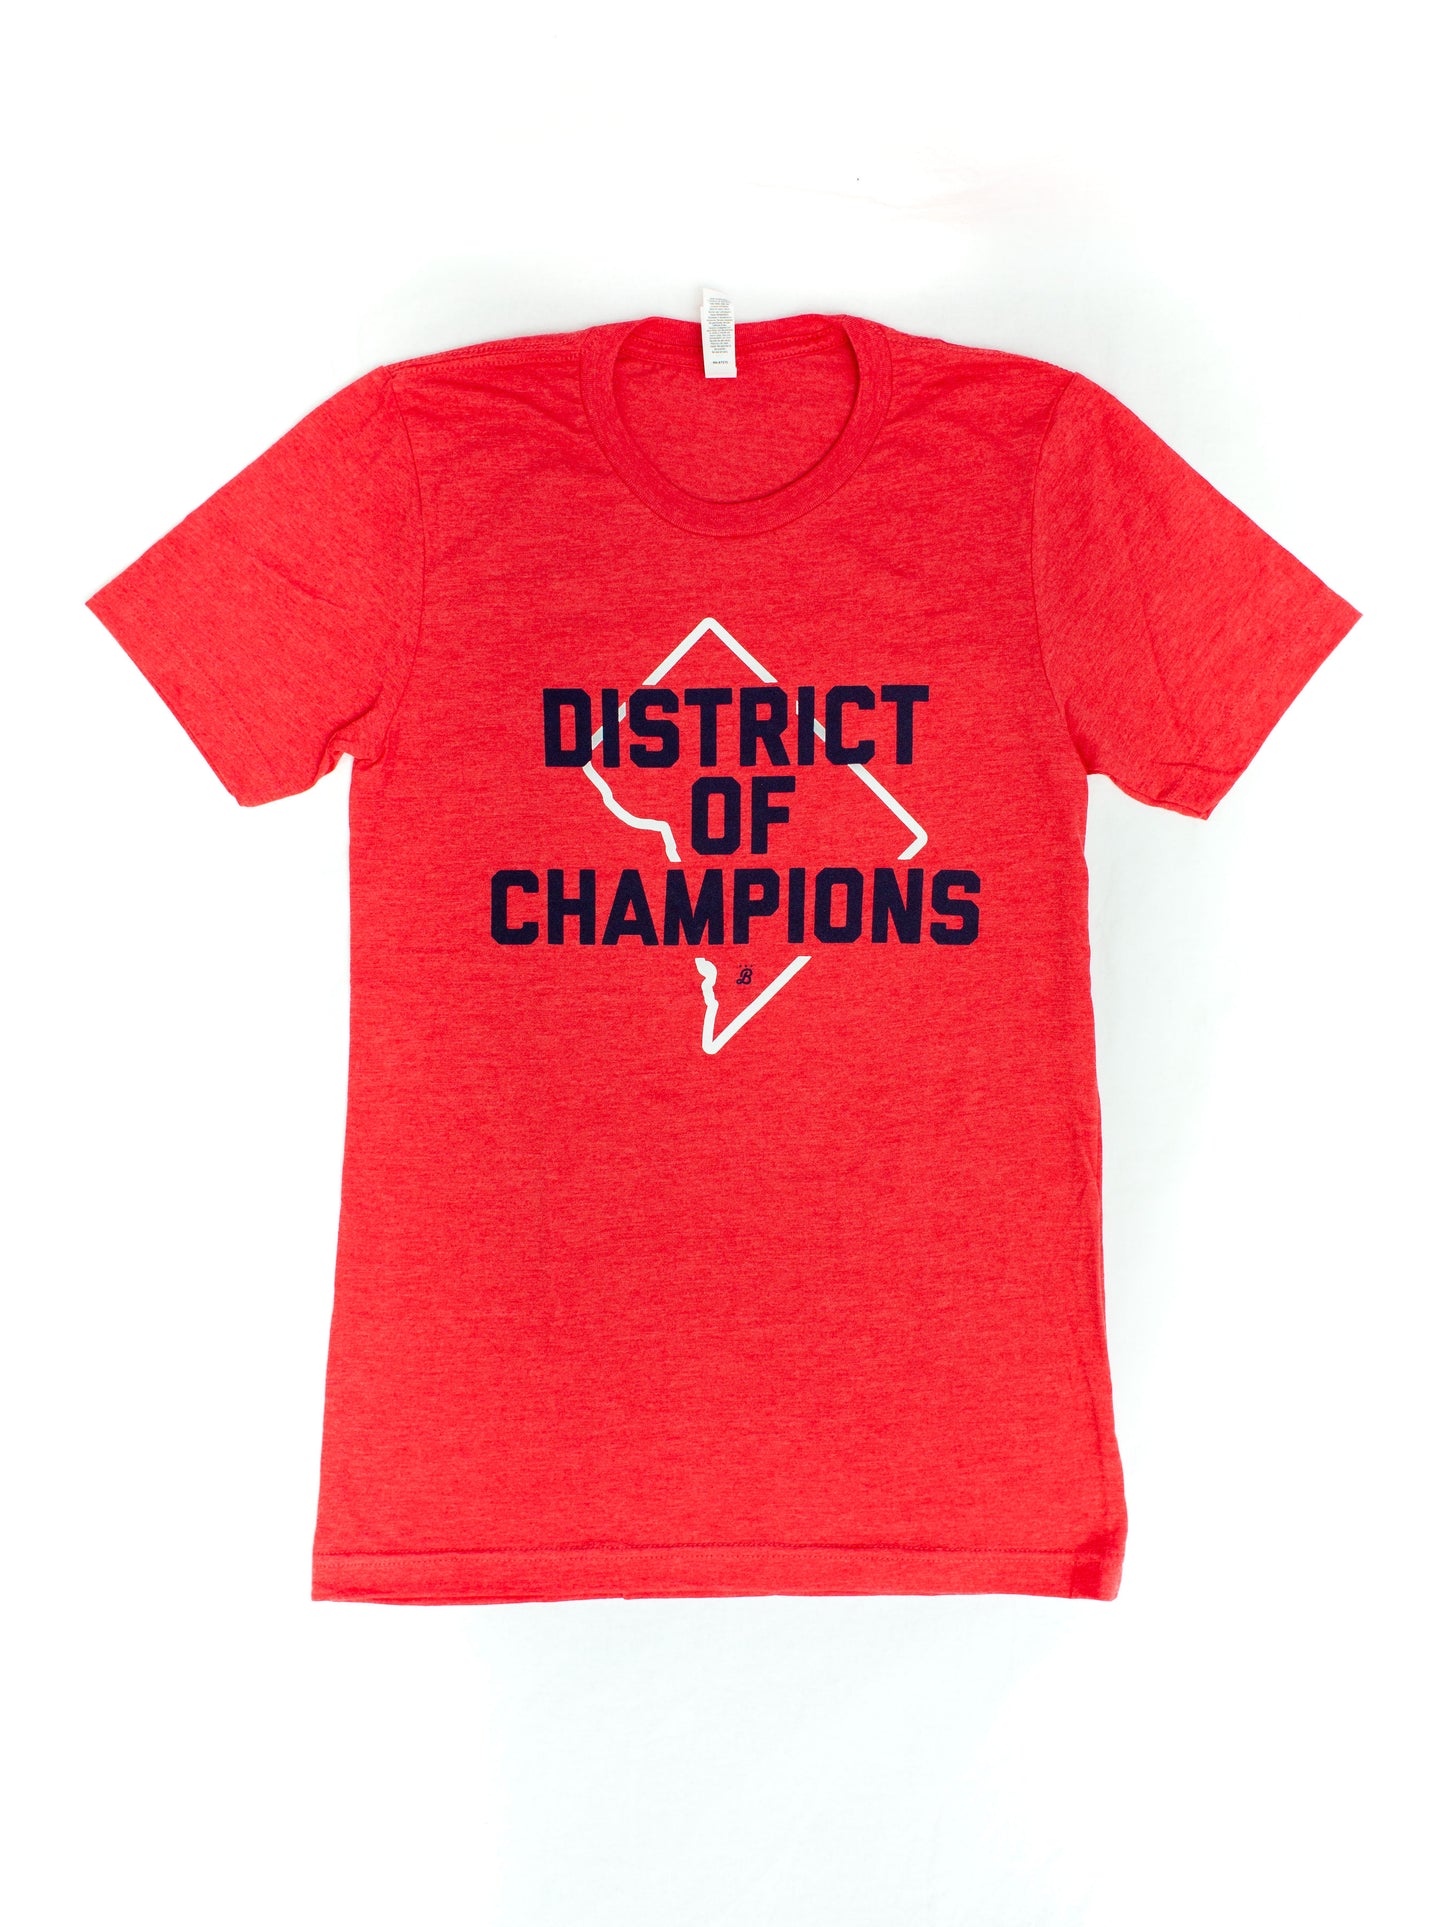 Unisex - DISTRICT of CHAMPIONS T-shirt